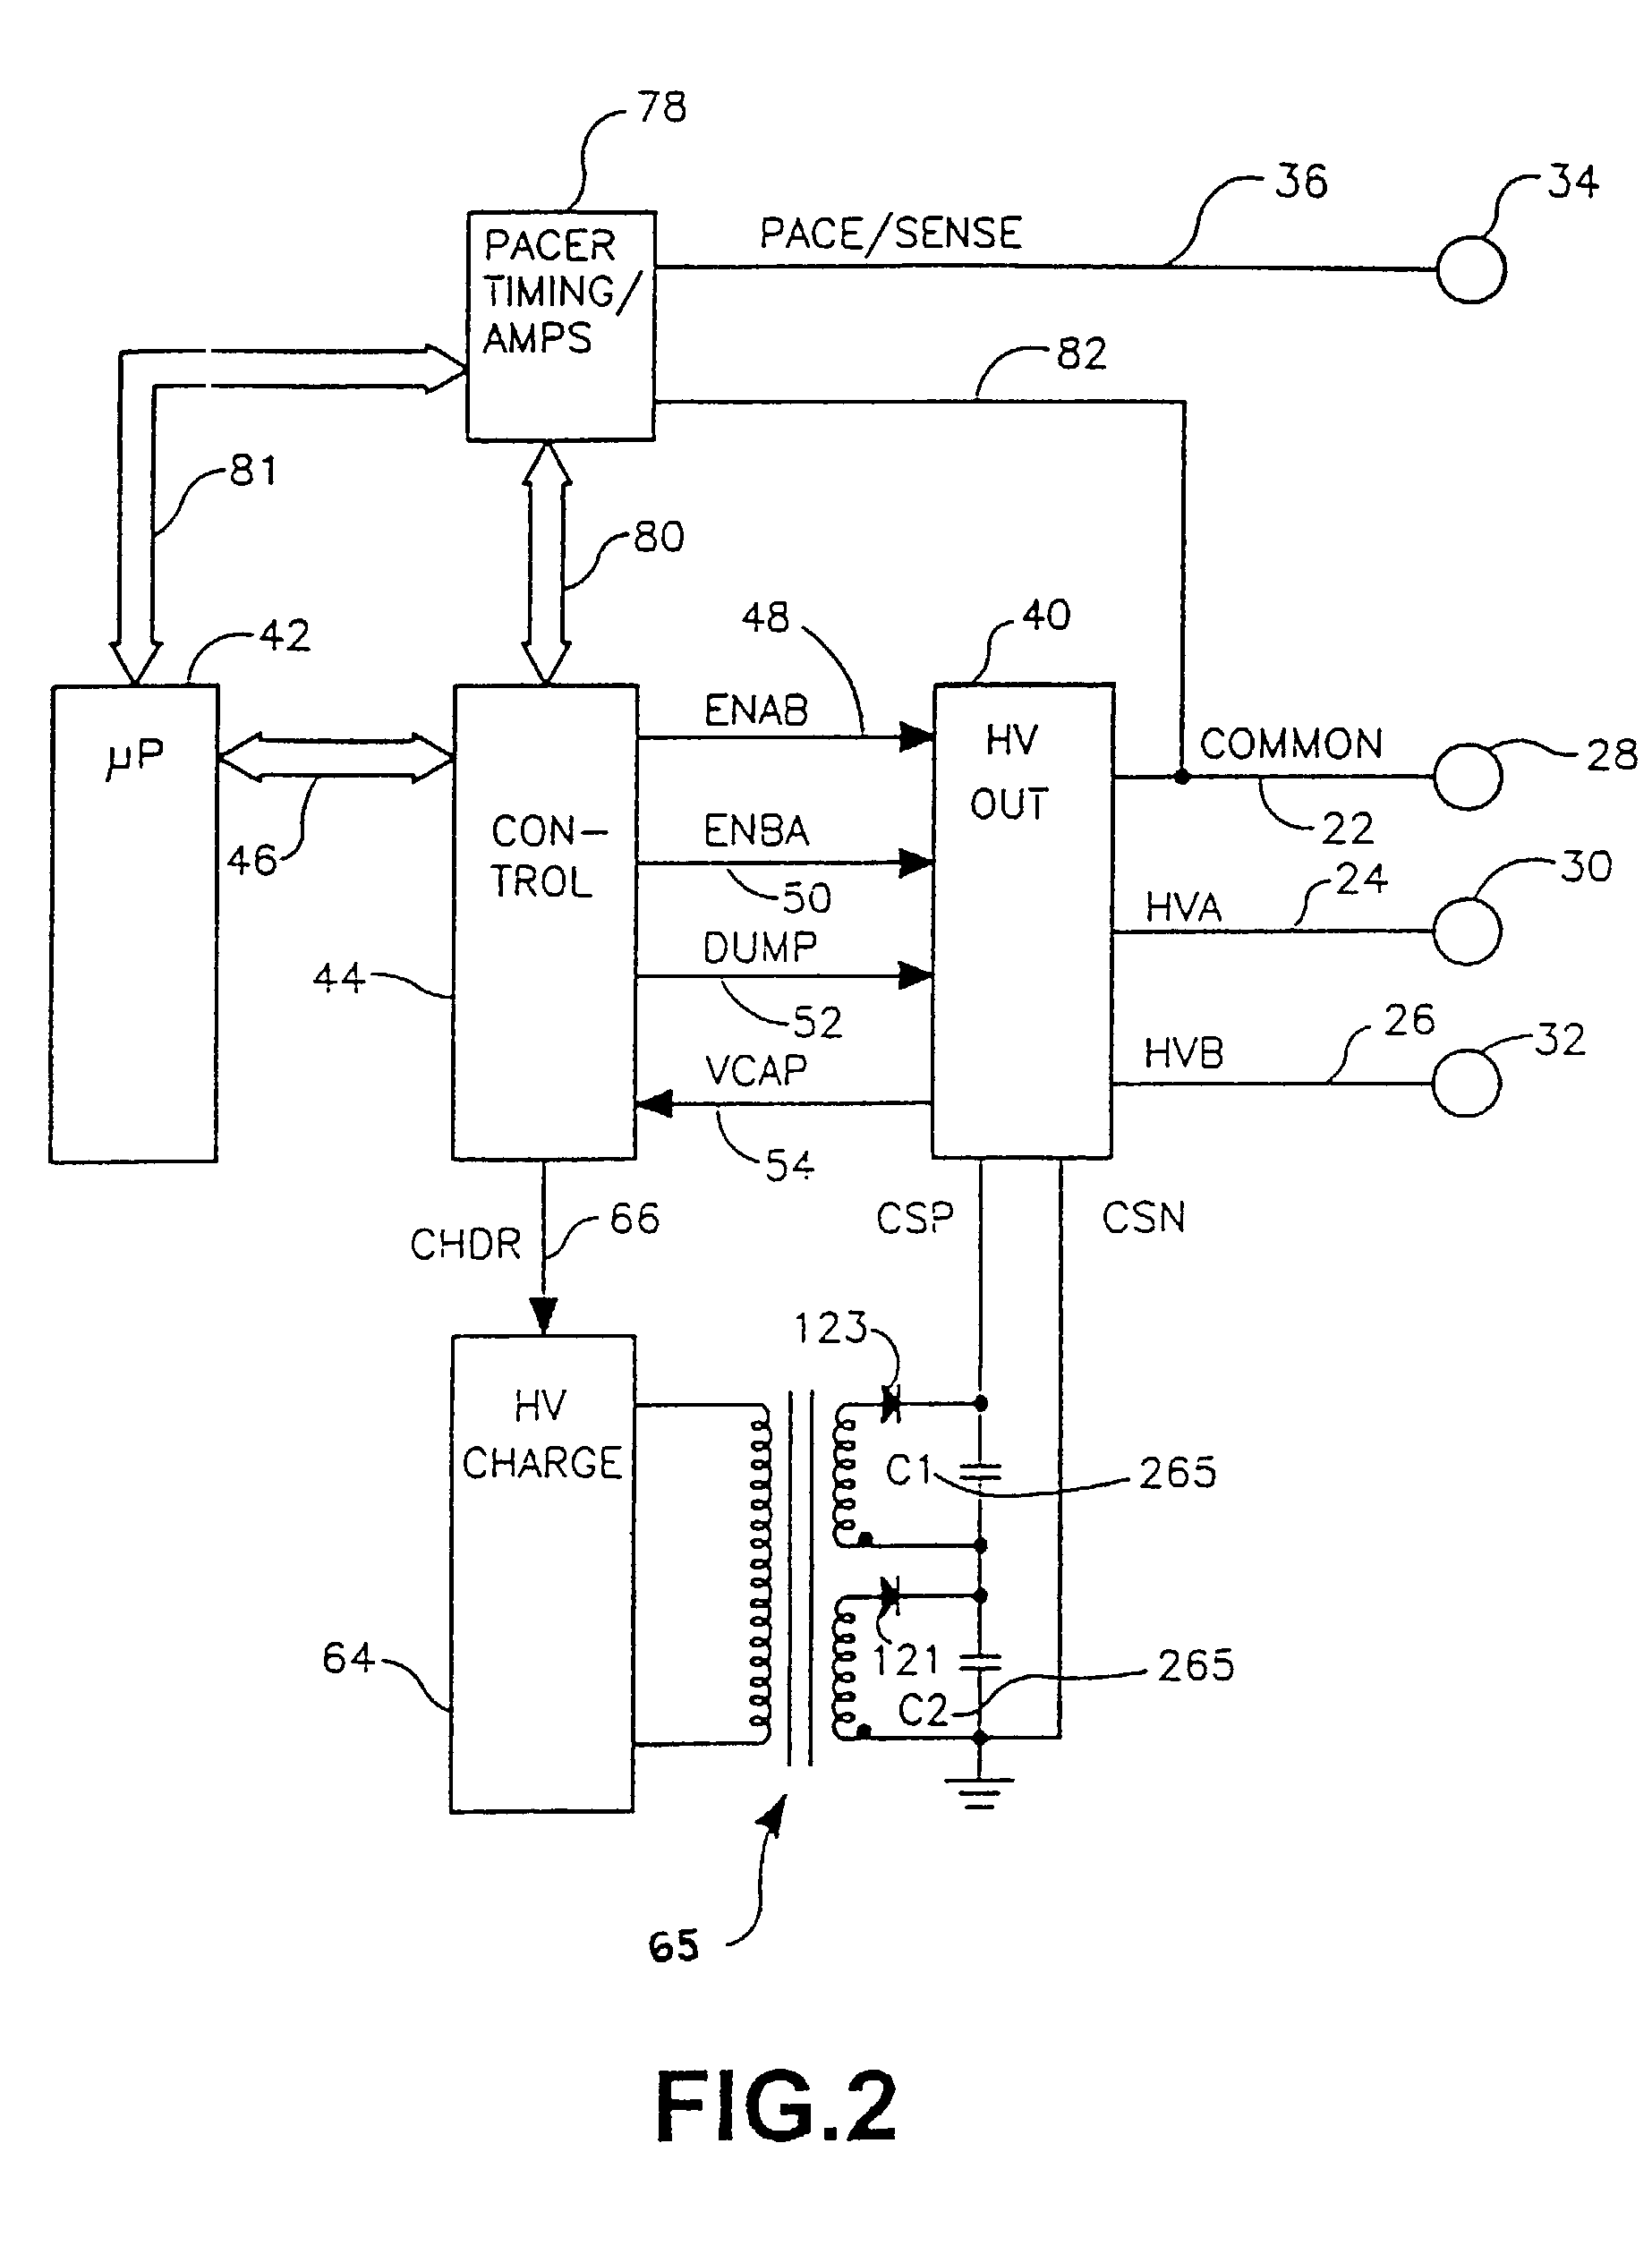 Implantable medical device having flat electrolytic capacitor with porous gas vent within electrolyte fill tube